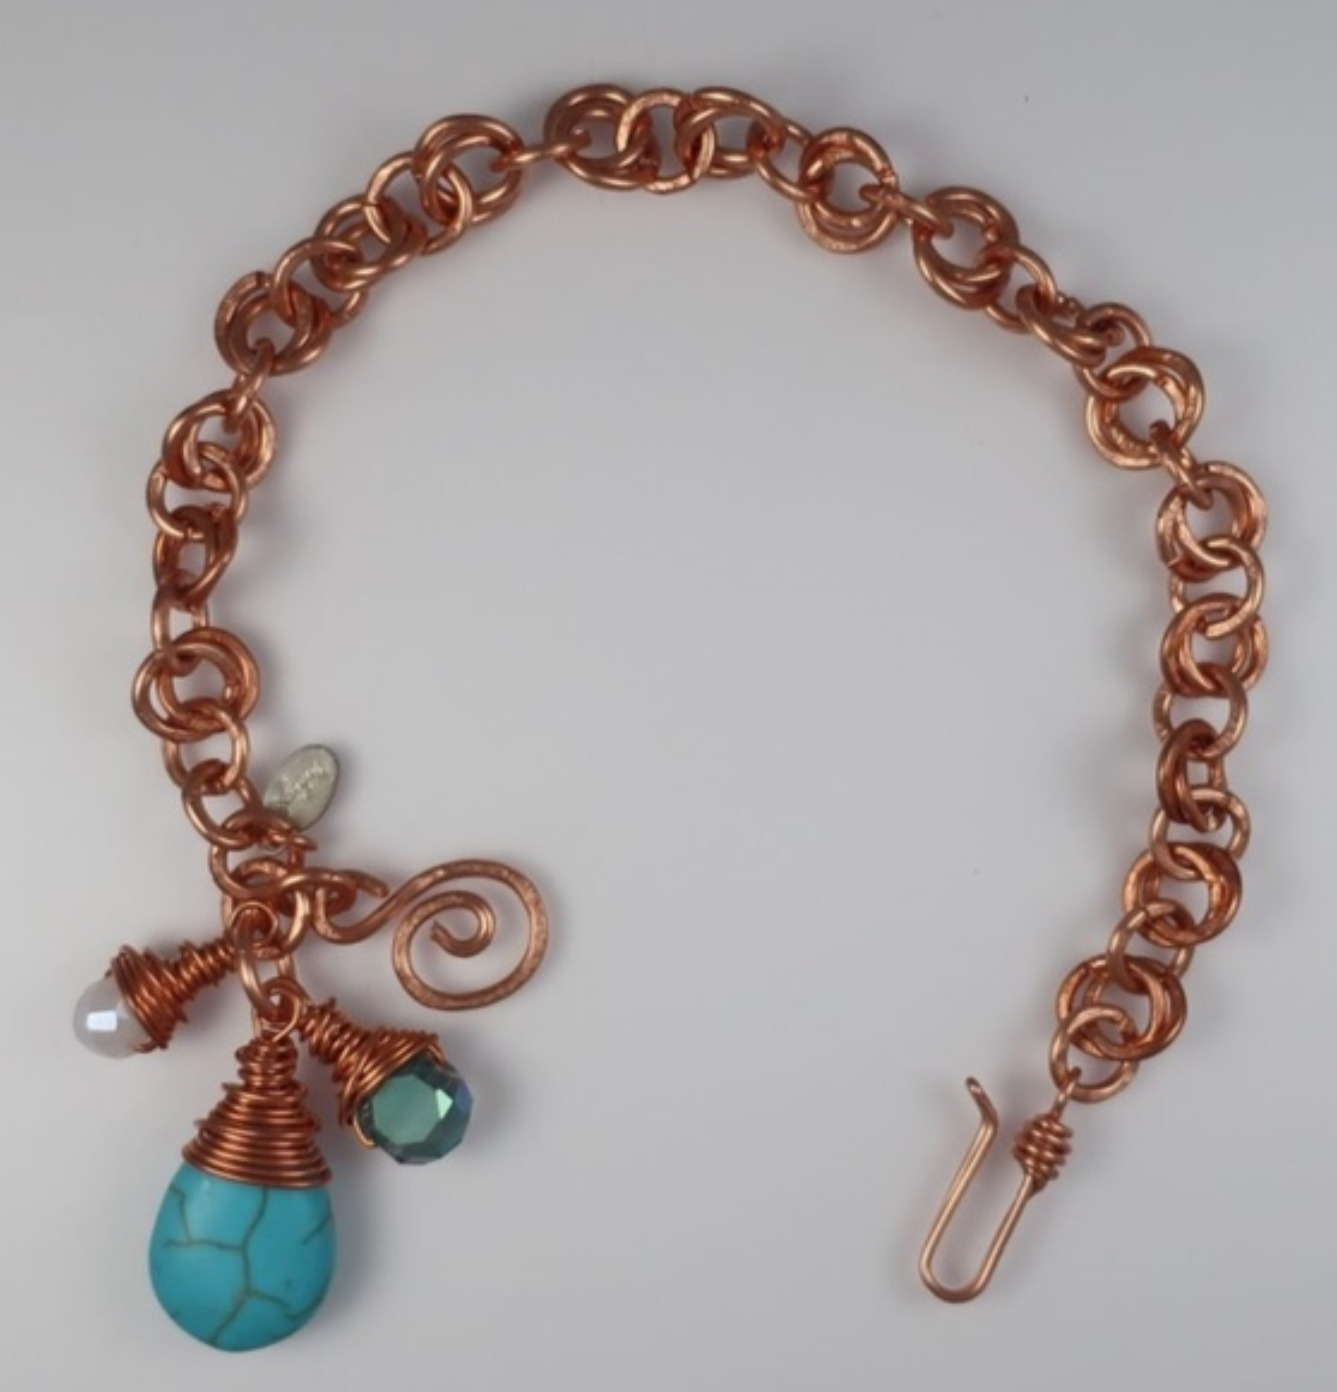 (215  - BCT) - Description: Handcrafted Bracelet, Copper Wire, Turquoise Howlite, Faceted Glass Beads, Hook Closure - Dimension: Adjustable up to 7 1/2 ' L (Inches)